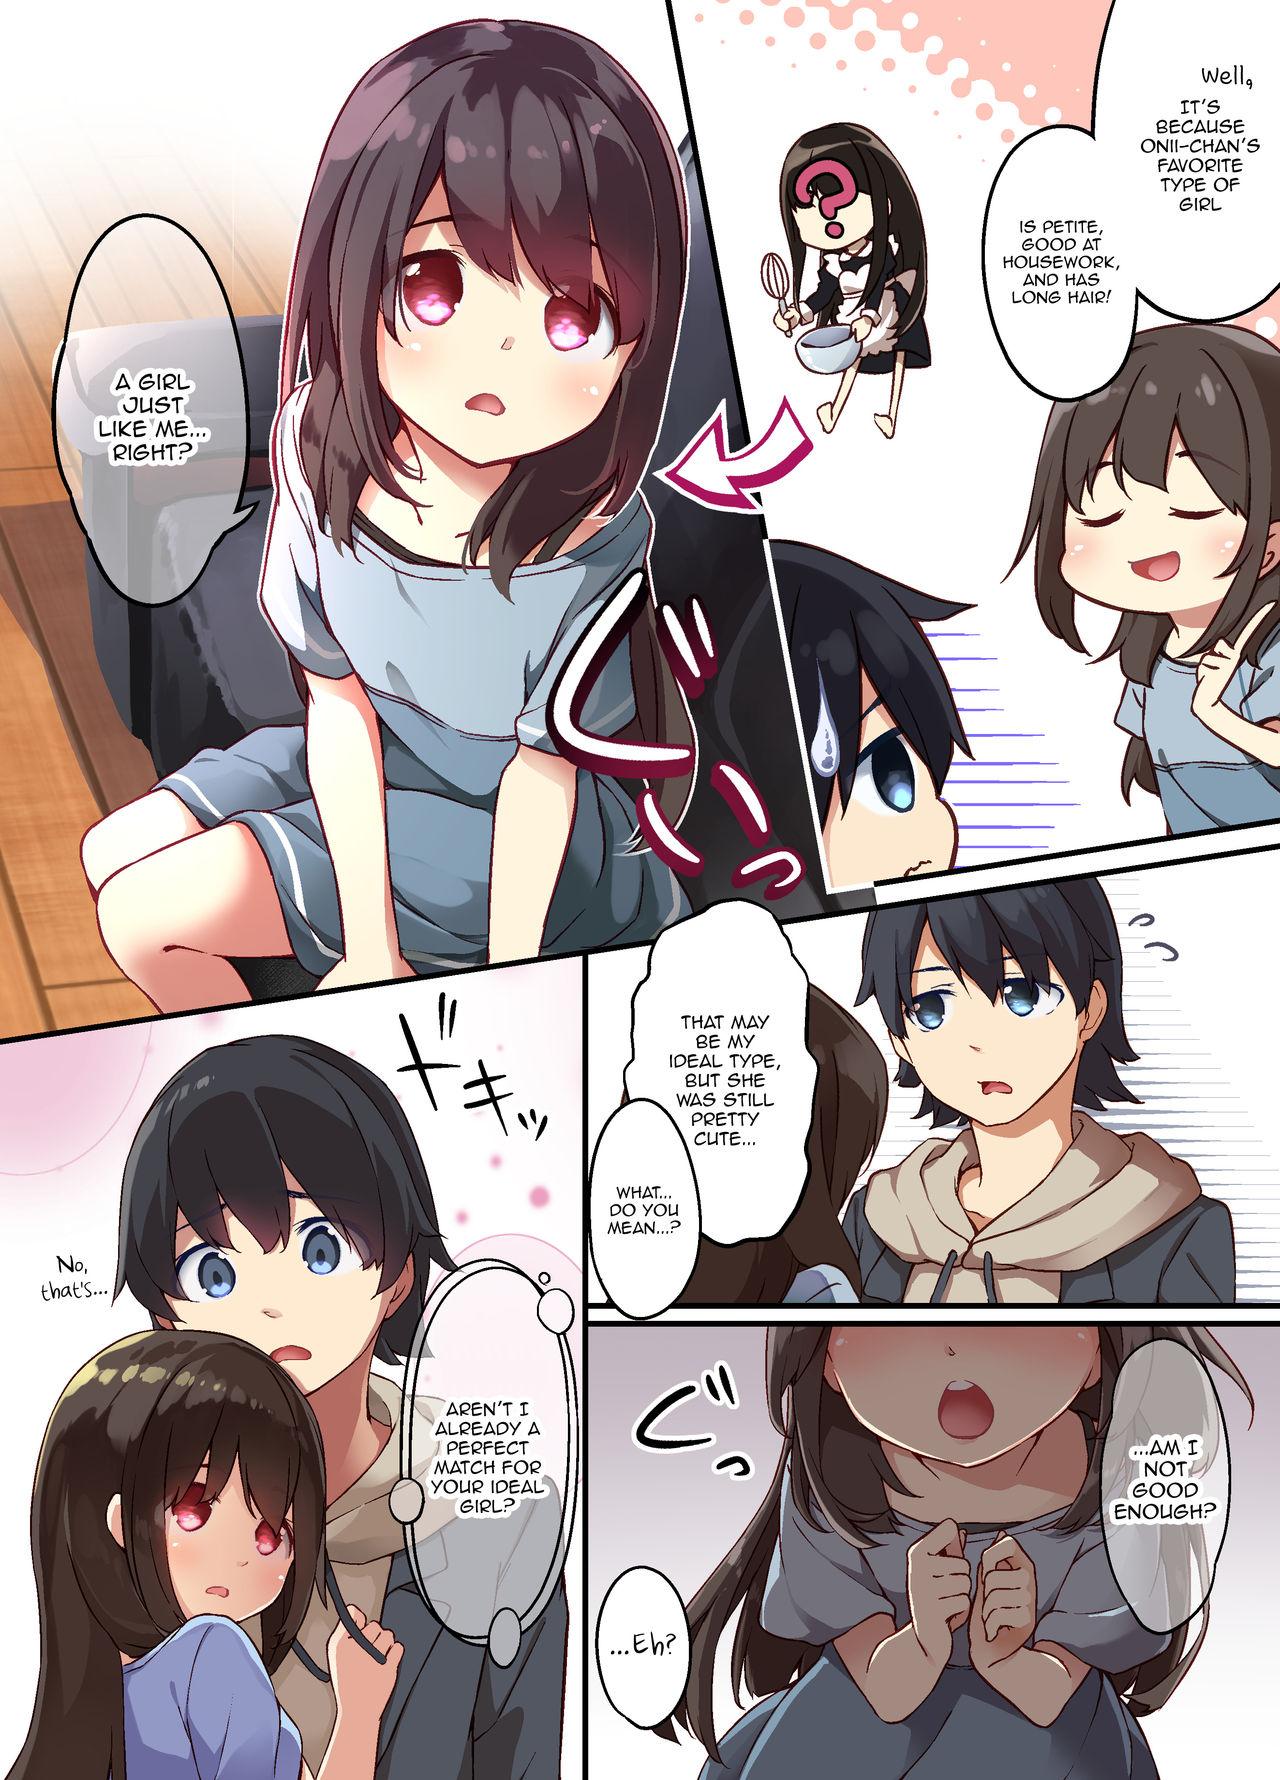 A Yandere Little Sister Wants to Be Impregnated by Her Big Brother, So She Switches Bodies With Him and They Have Baby-Making Sex 3